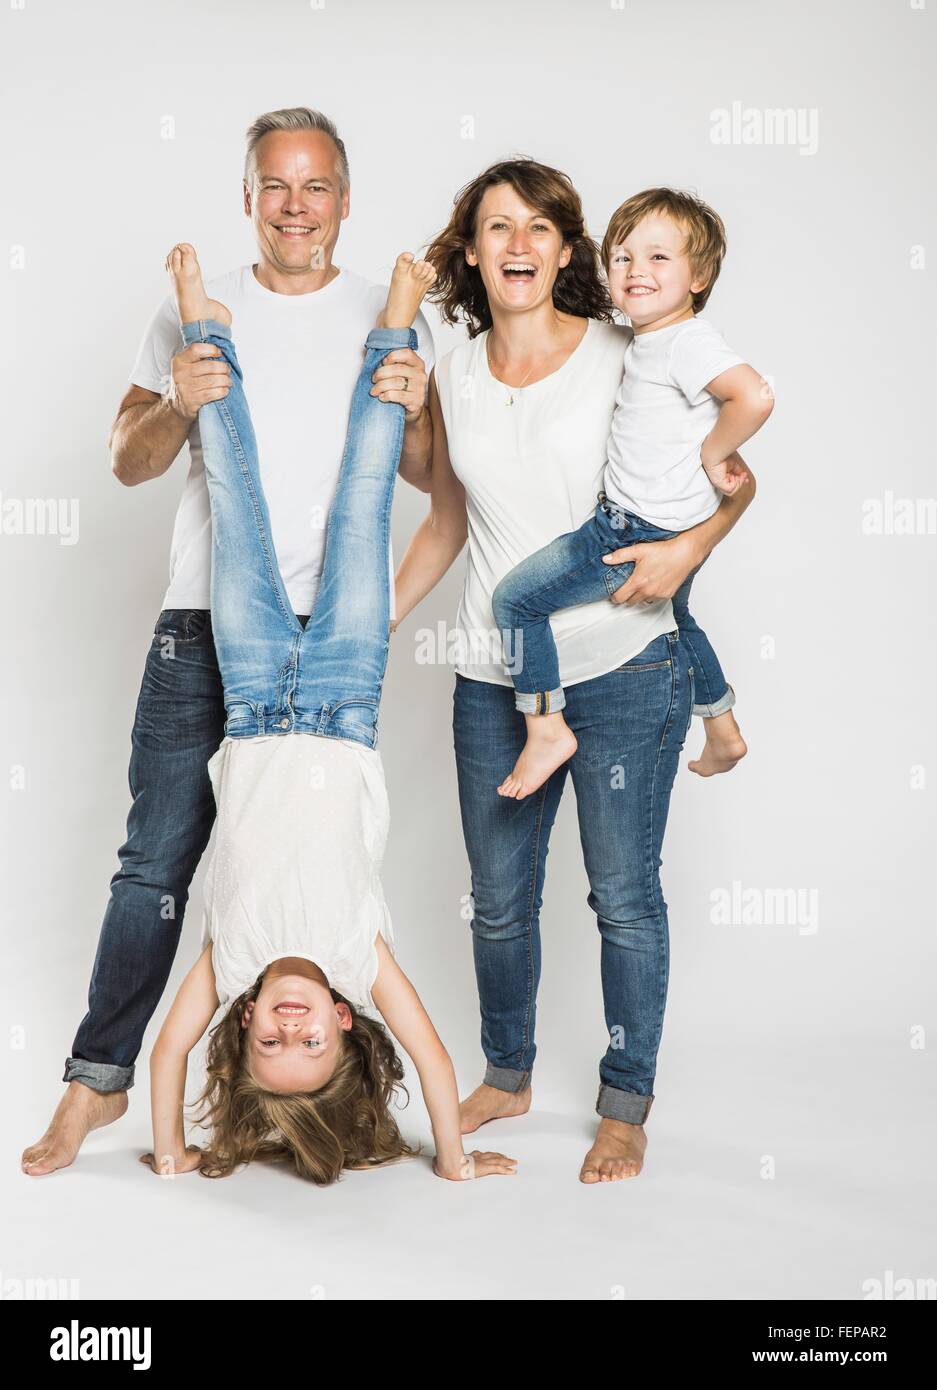 Studio portrait of man holding daughter upside down with wife and son Stock Photo